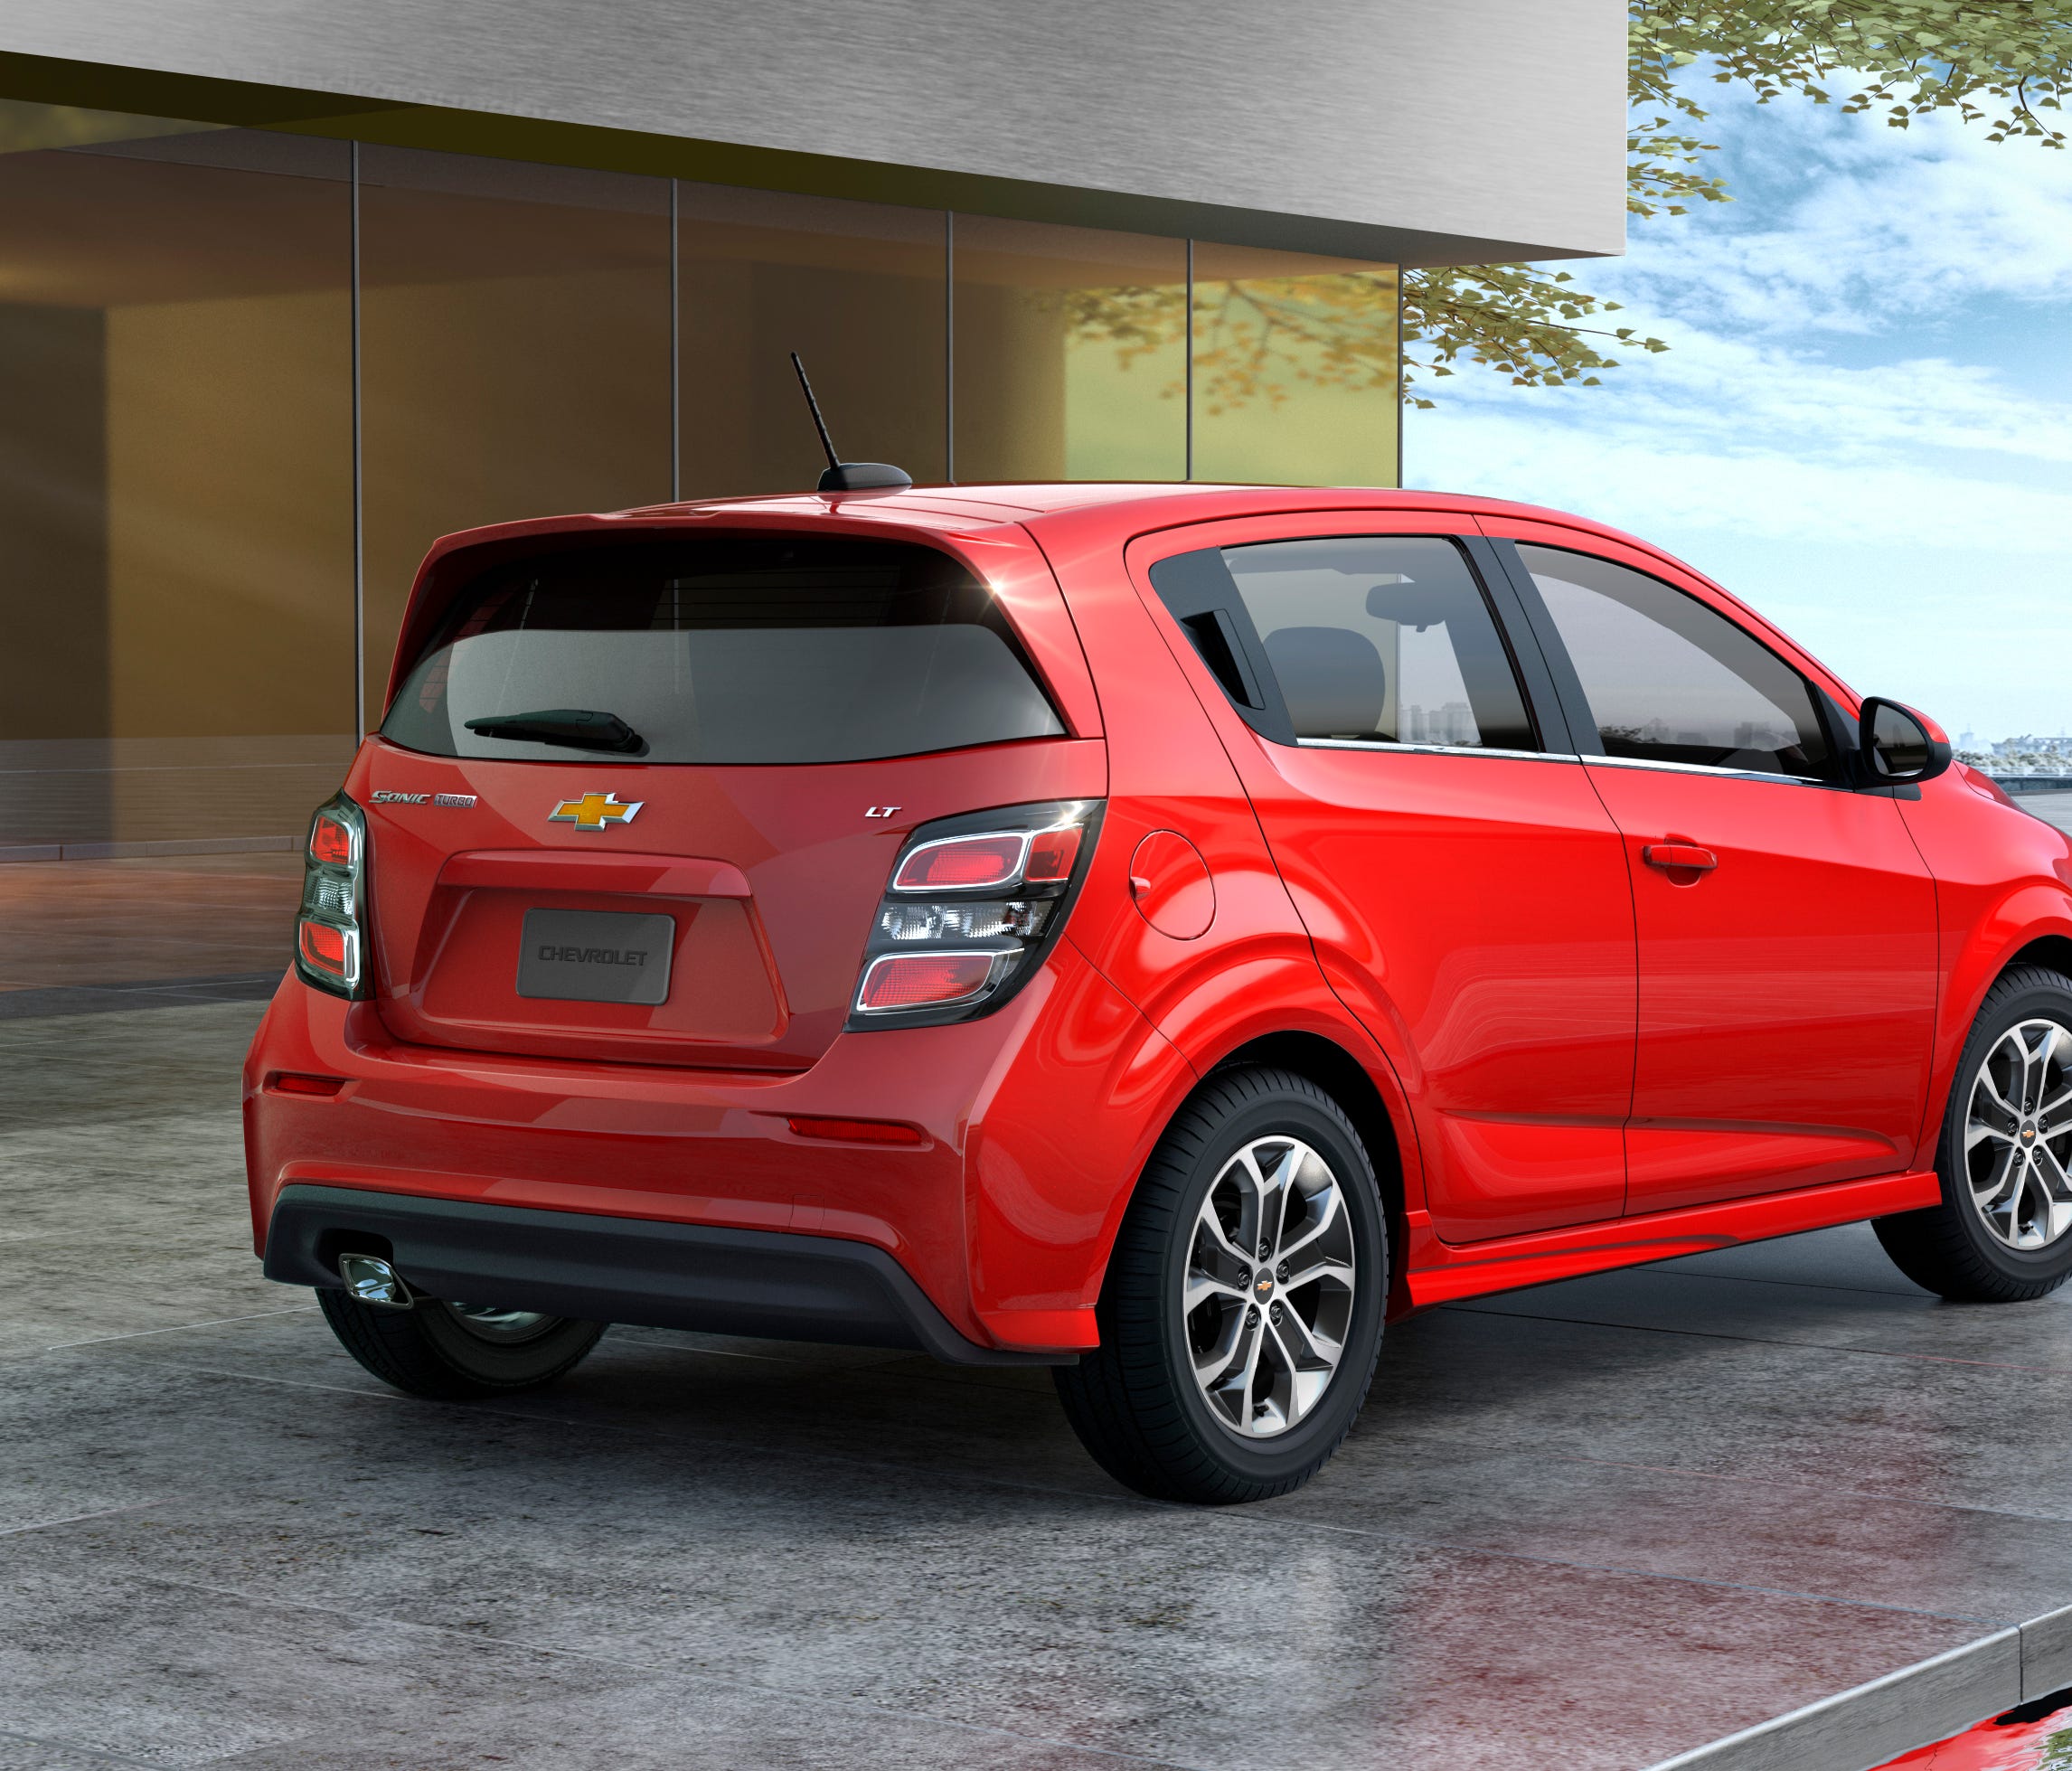 These are some of the most common options if you rent a compact car at a U.S. airport location: 2018 Chevrolet Sonic.